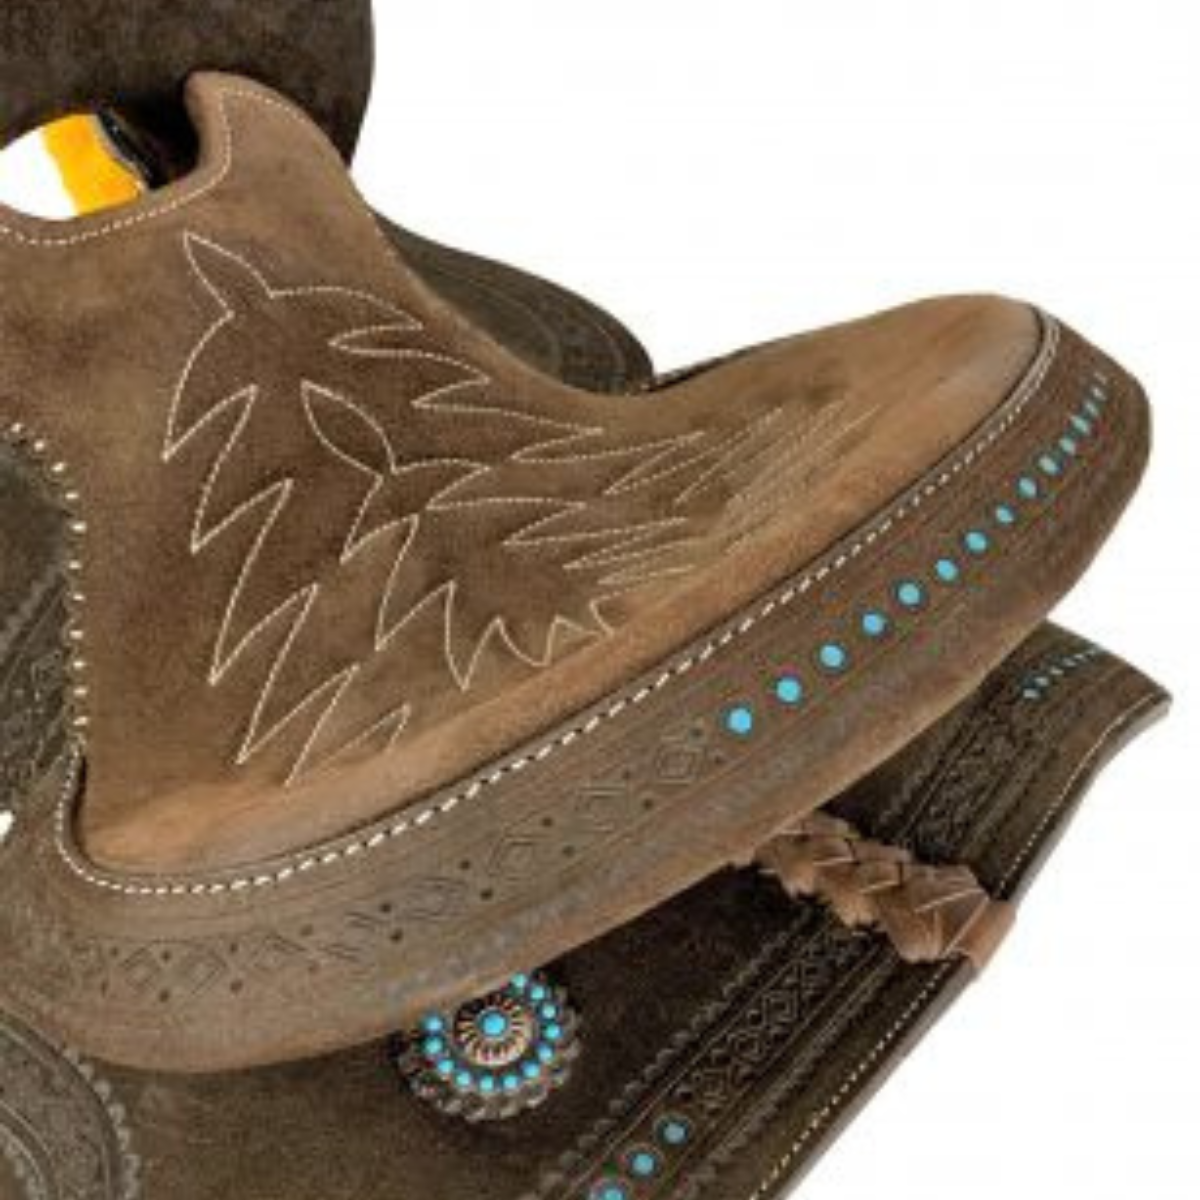 12" Double T  Barrel style saddle with Oiled Rough out leather, Teal buckstitch accents and flower conchos - Double T Saddles